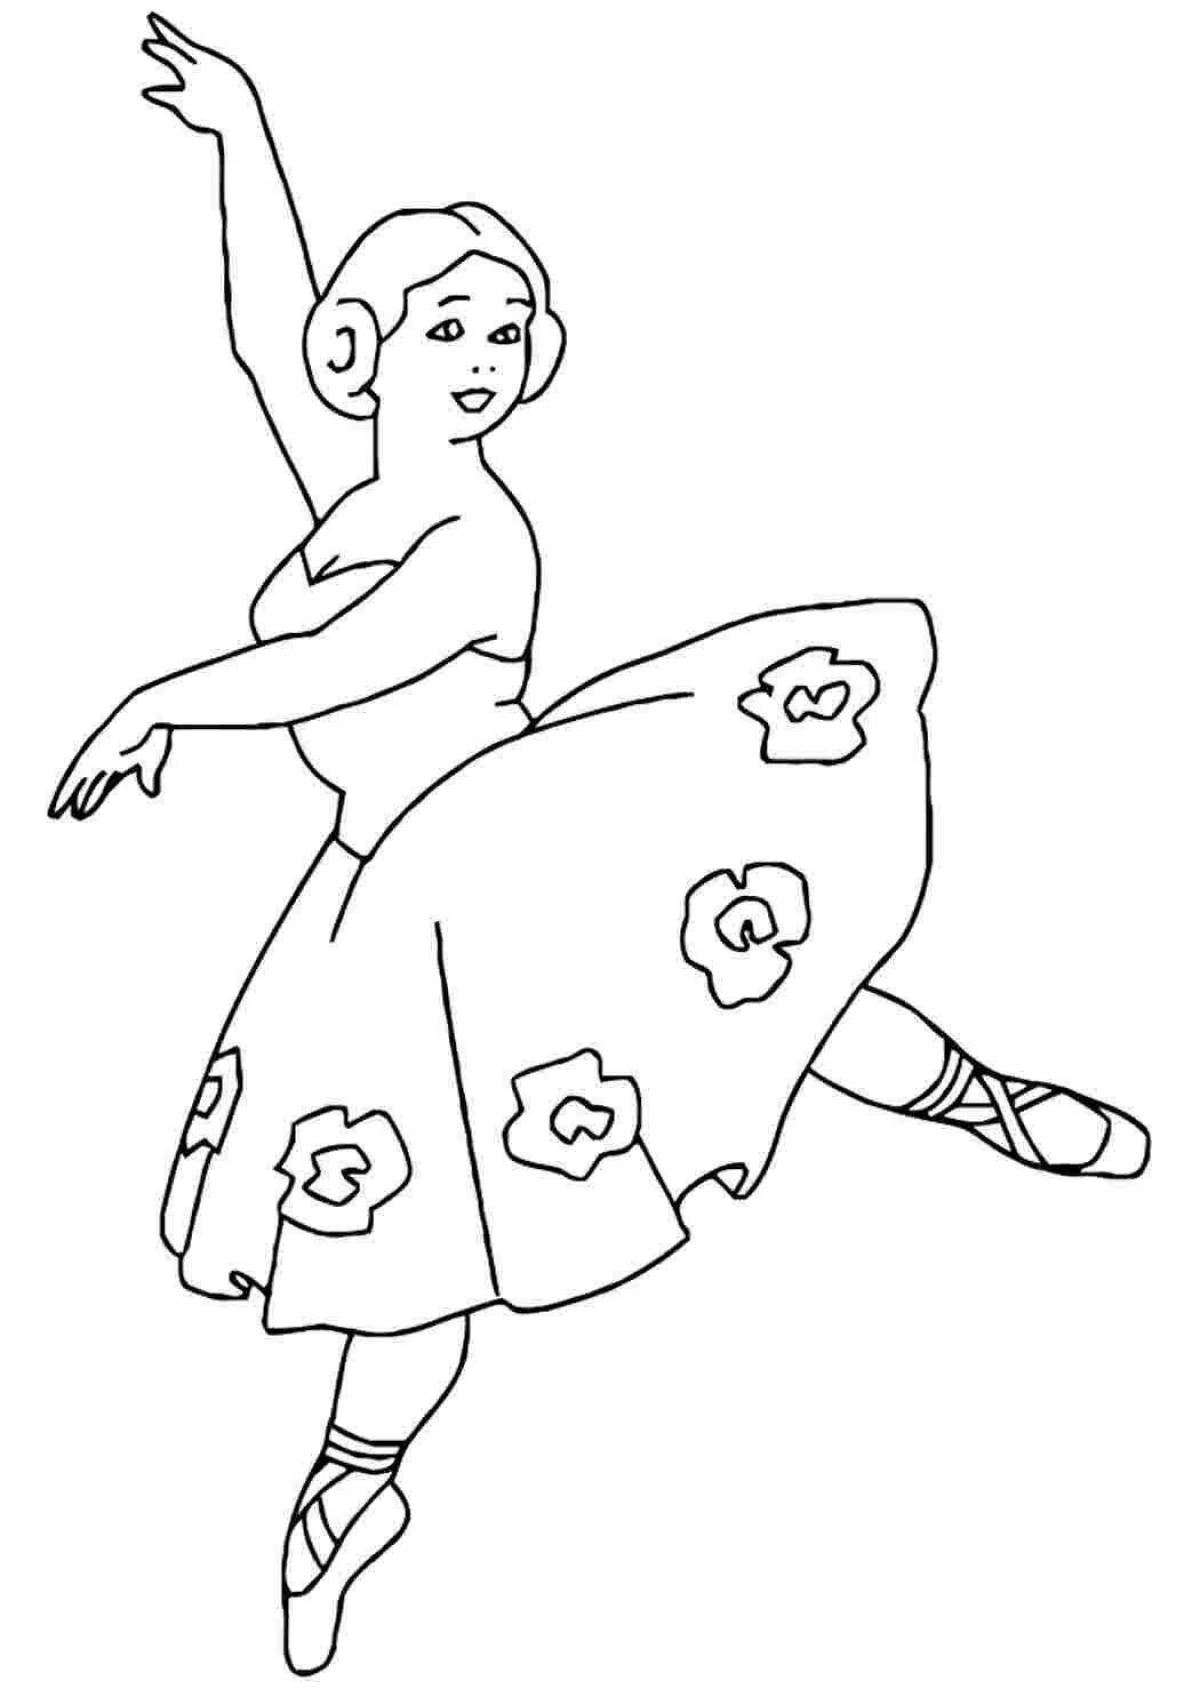 Coloring page playful dancing girl